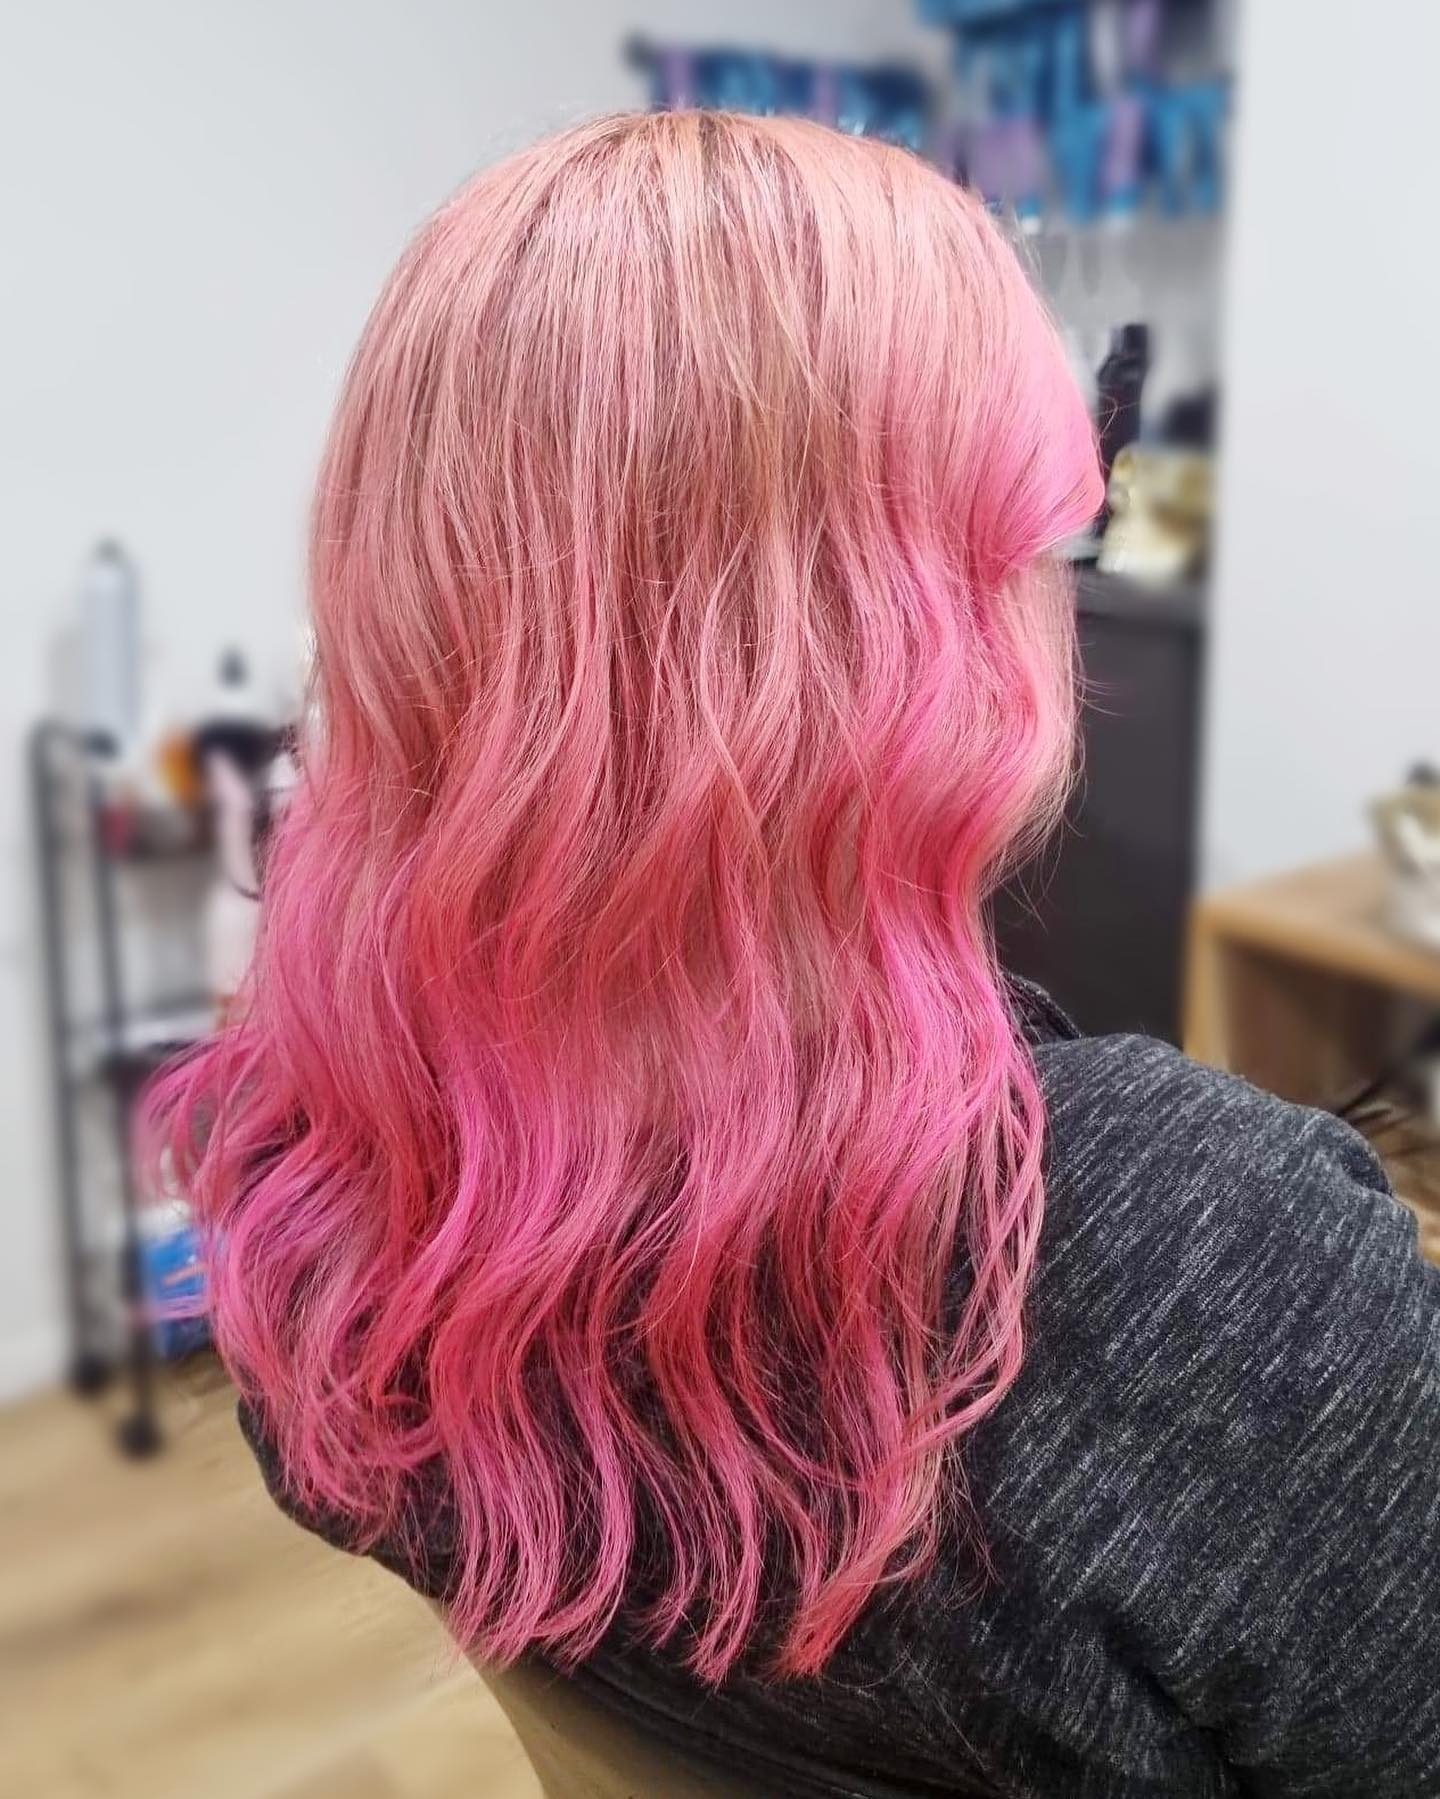 pink ombre hair color 41 Ombre pink hair blonde | Pastel pink ombre hair | Pink balayage Hair Pink Ombre Hair Color for Women